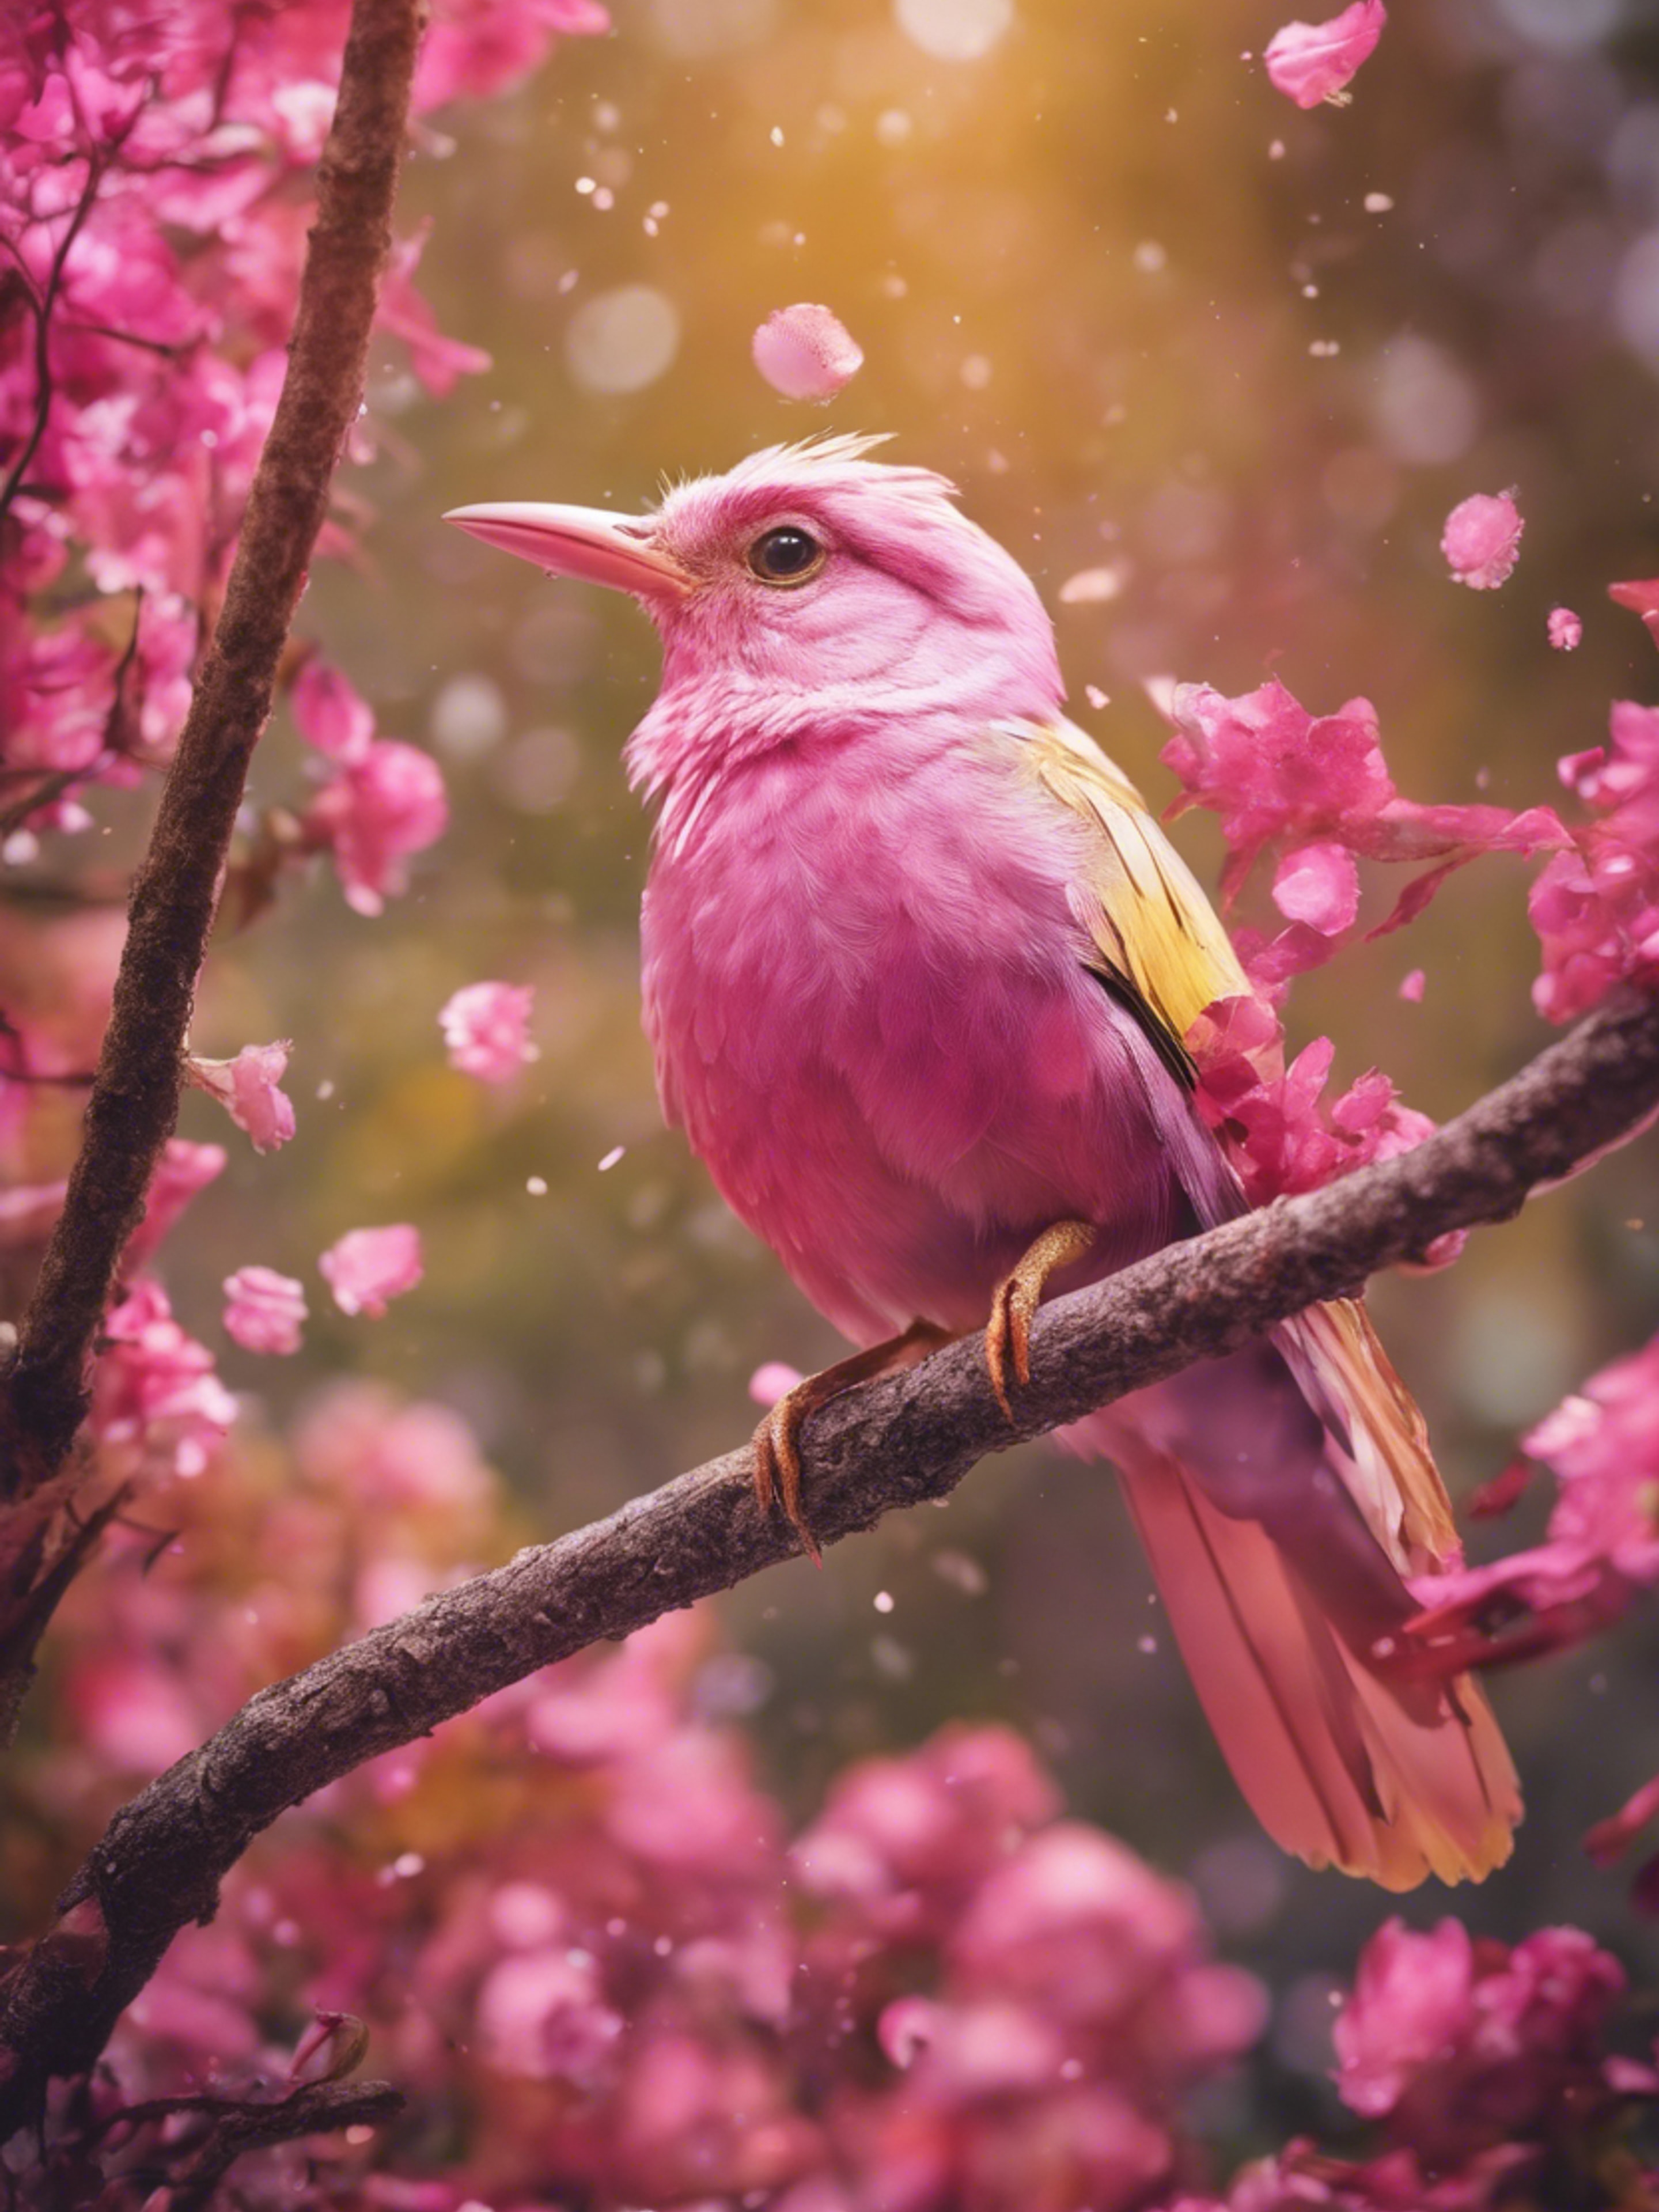 An enchanting pink and gold bird unknown of in biology books, fluttering in an explosion of color in the forest.壁紙[4daf5f1d2e46407b9d3d]